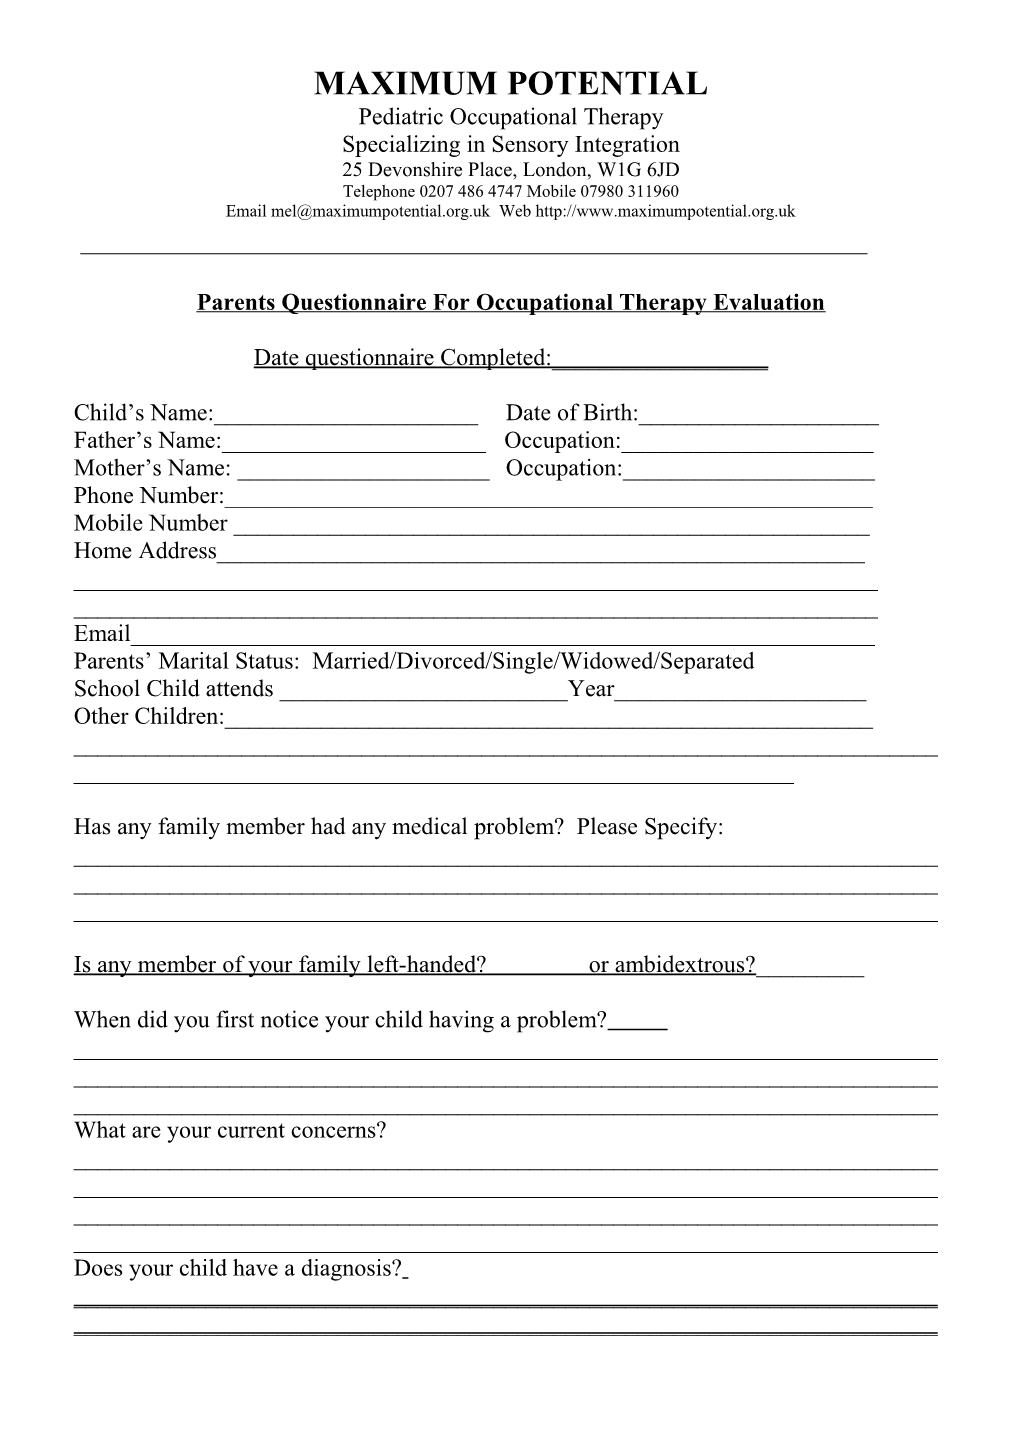 Parents Questionnaire for Occupational Therapy Evaluation